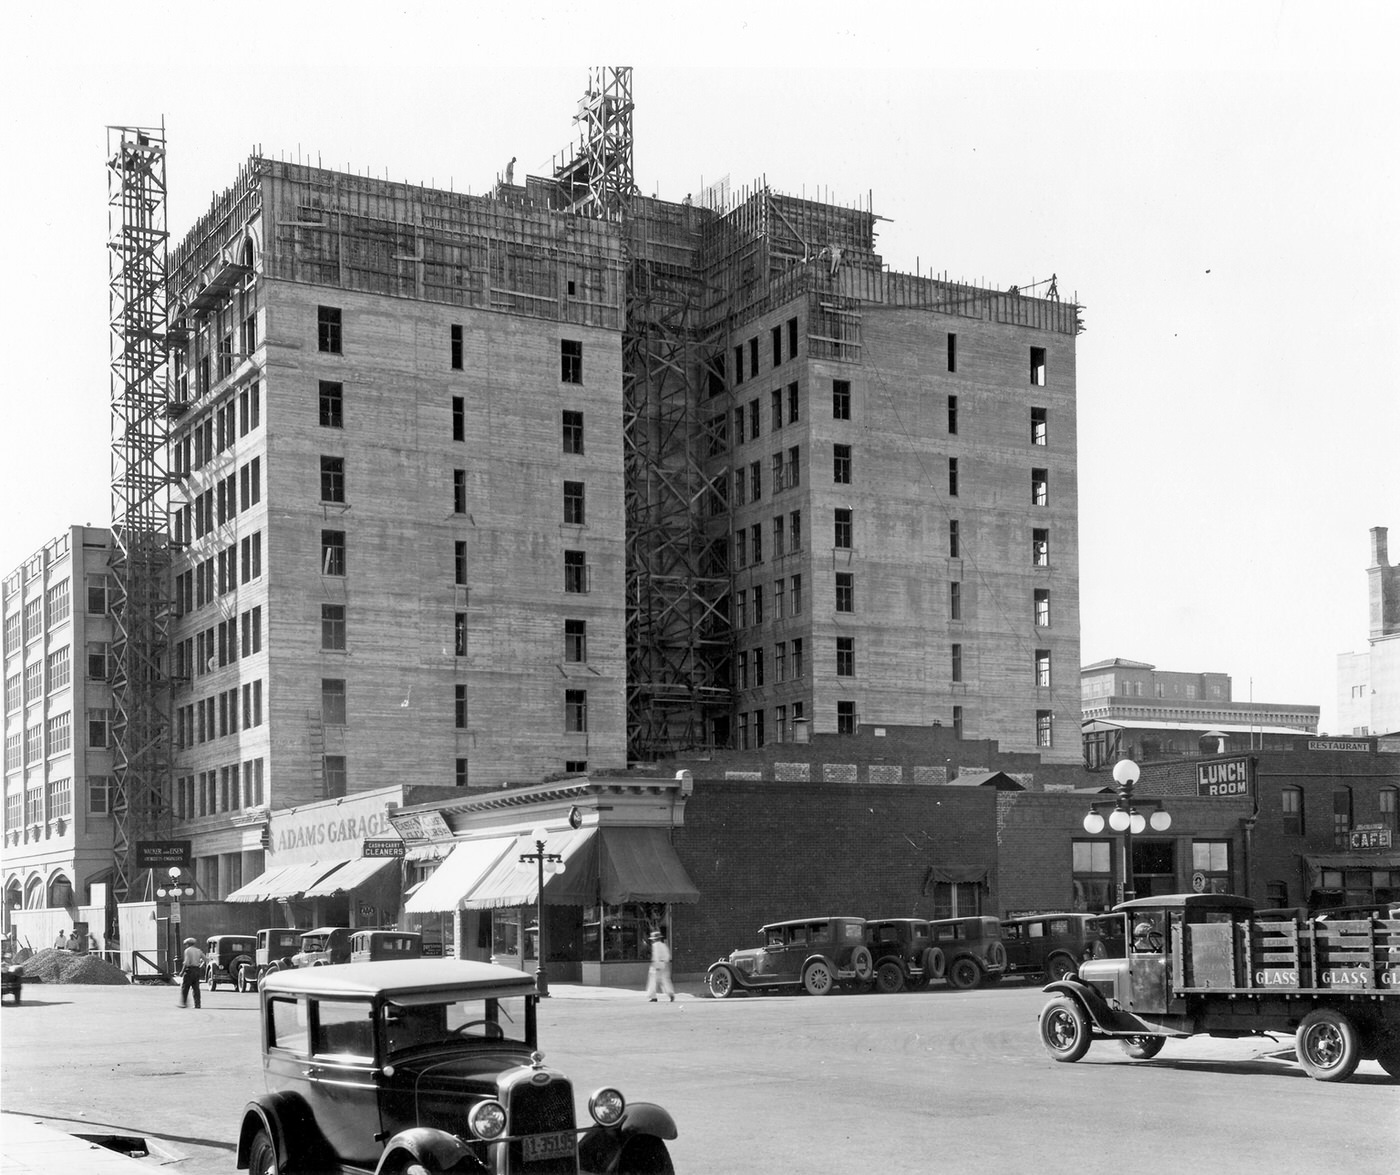 Business was so good — even with new competition from the San Carlos and Westward Ho — that the Adams saw construction of a 10-story addition to the east of the main building.